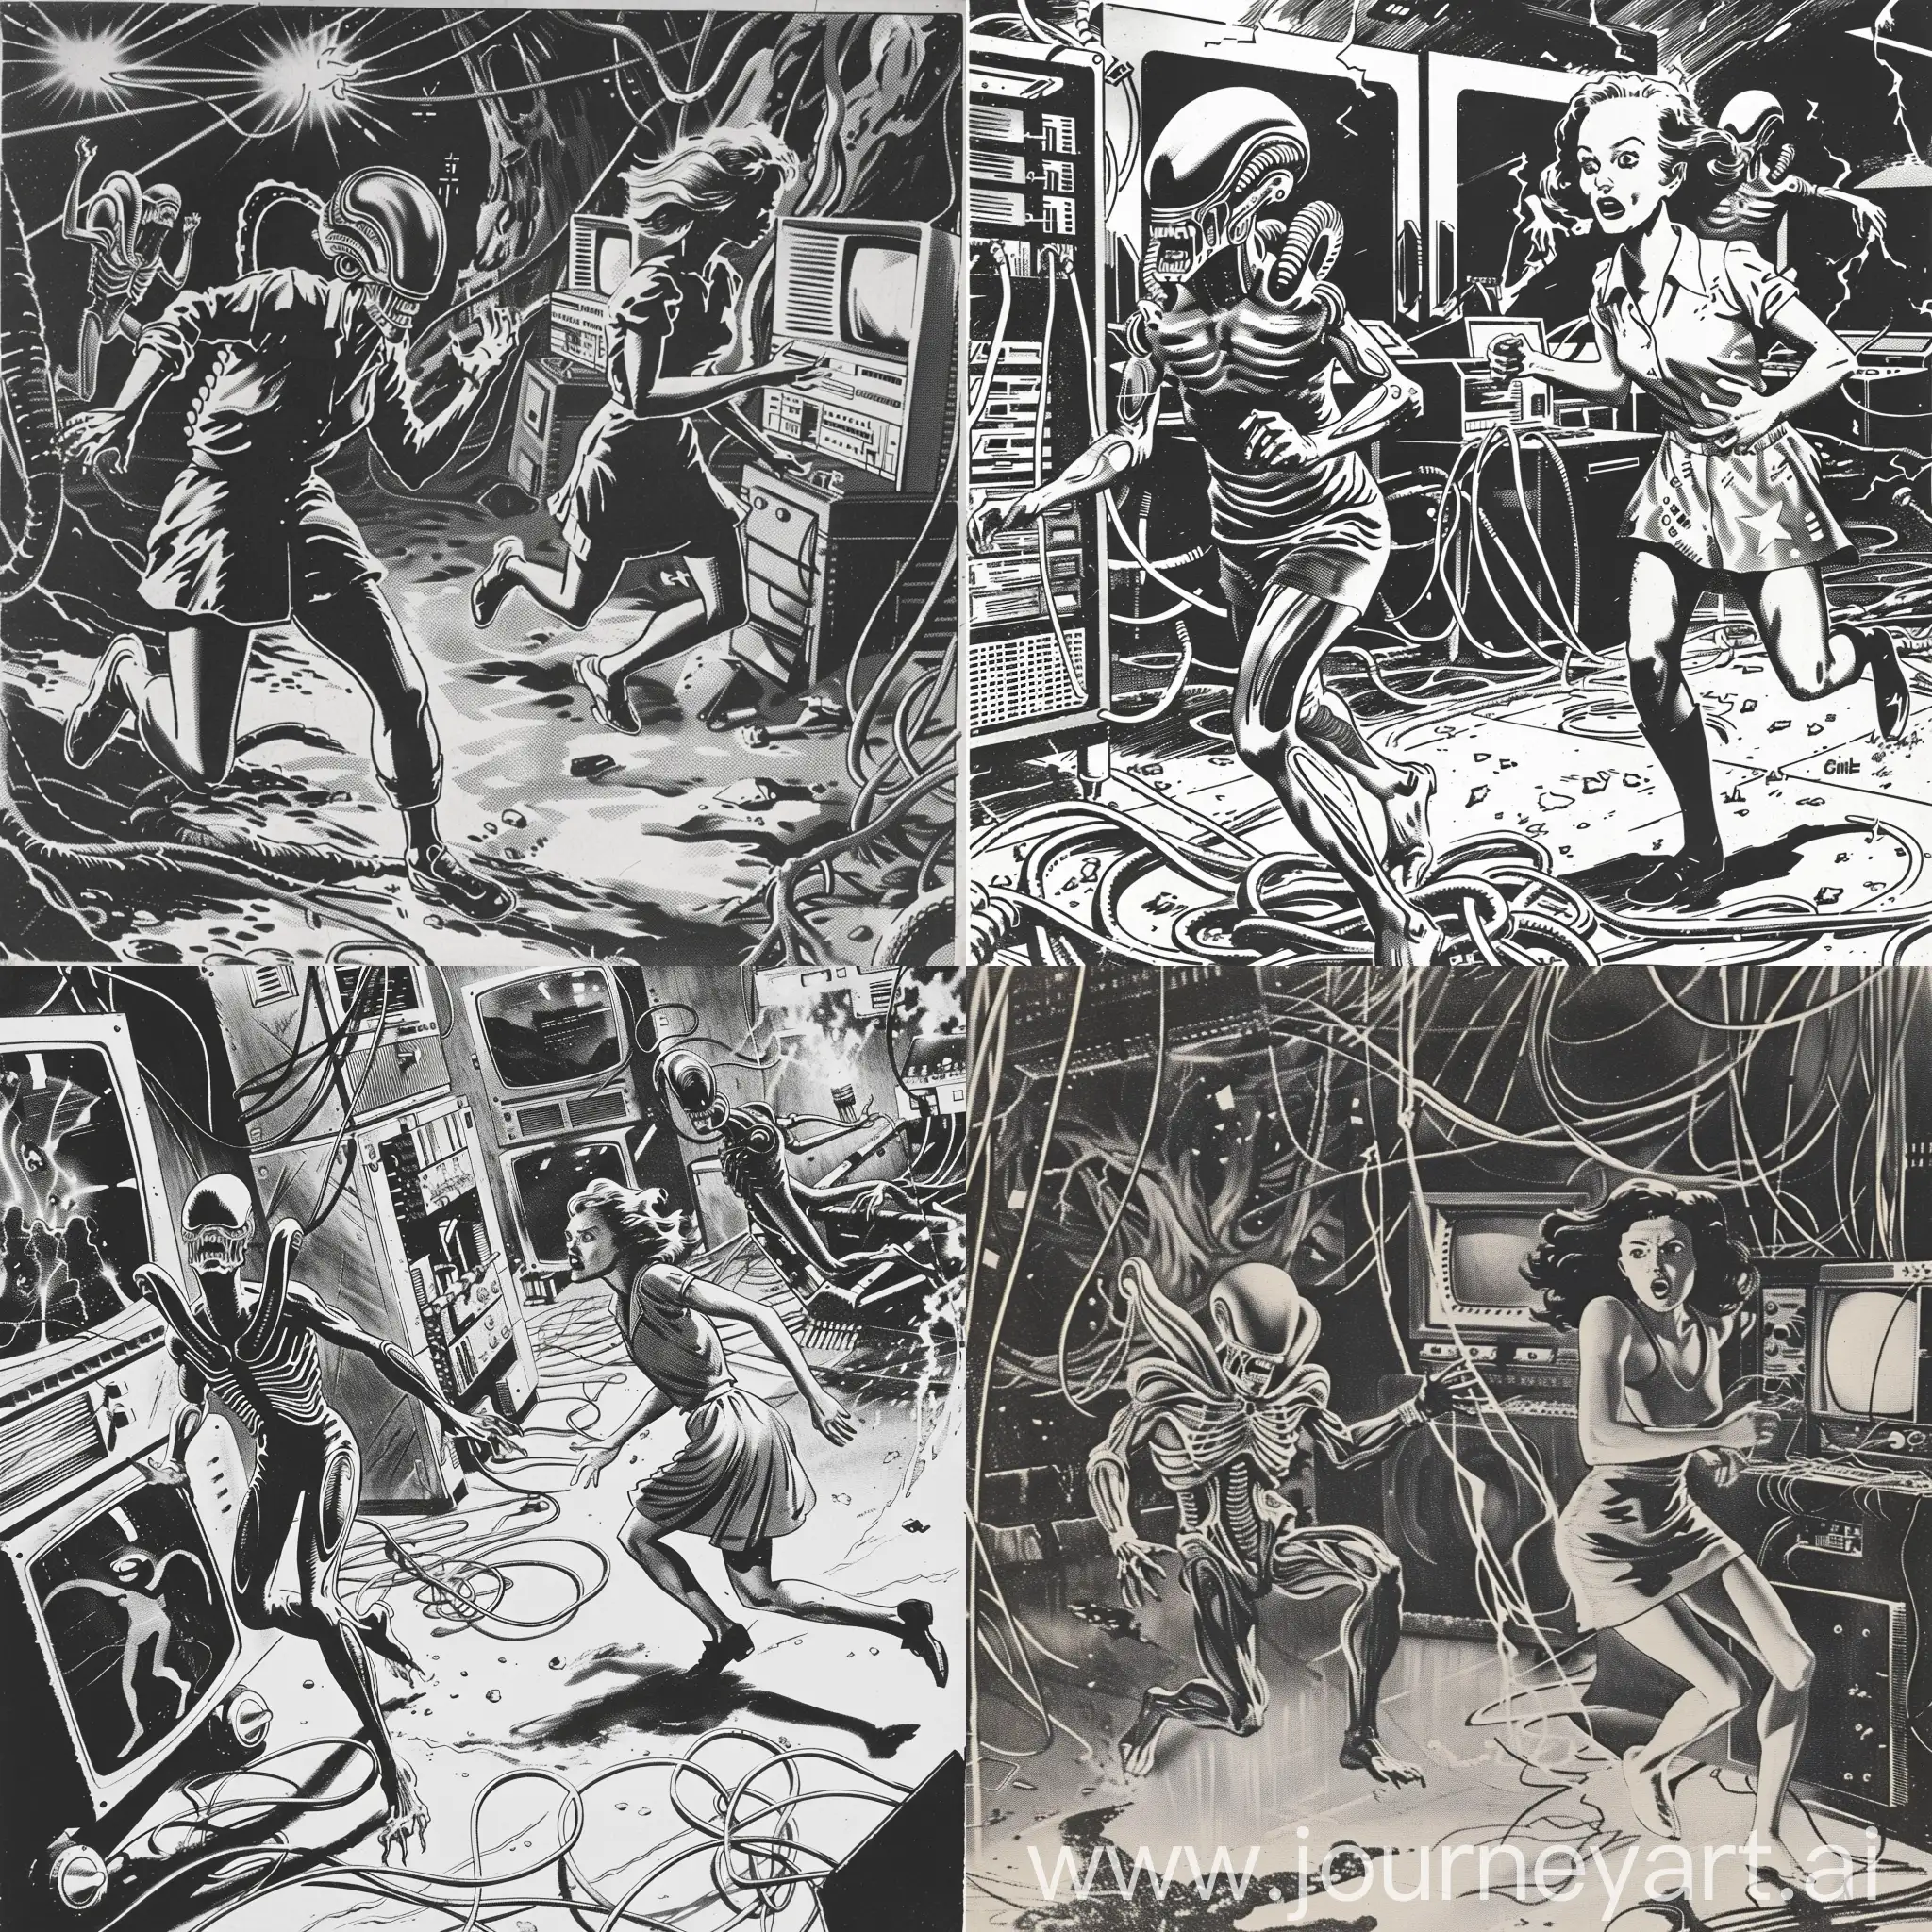 a comic book scene from 1950 with one alien and one woman running from them, black and white. a lot of wires and computers around